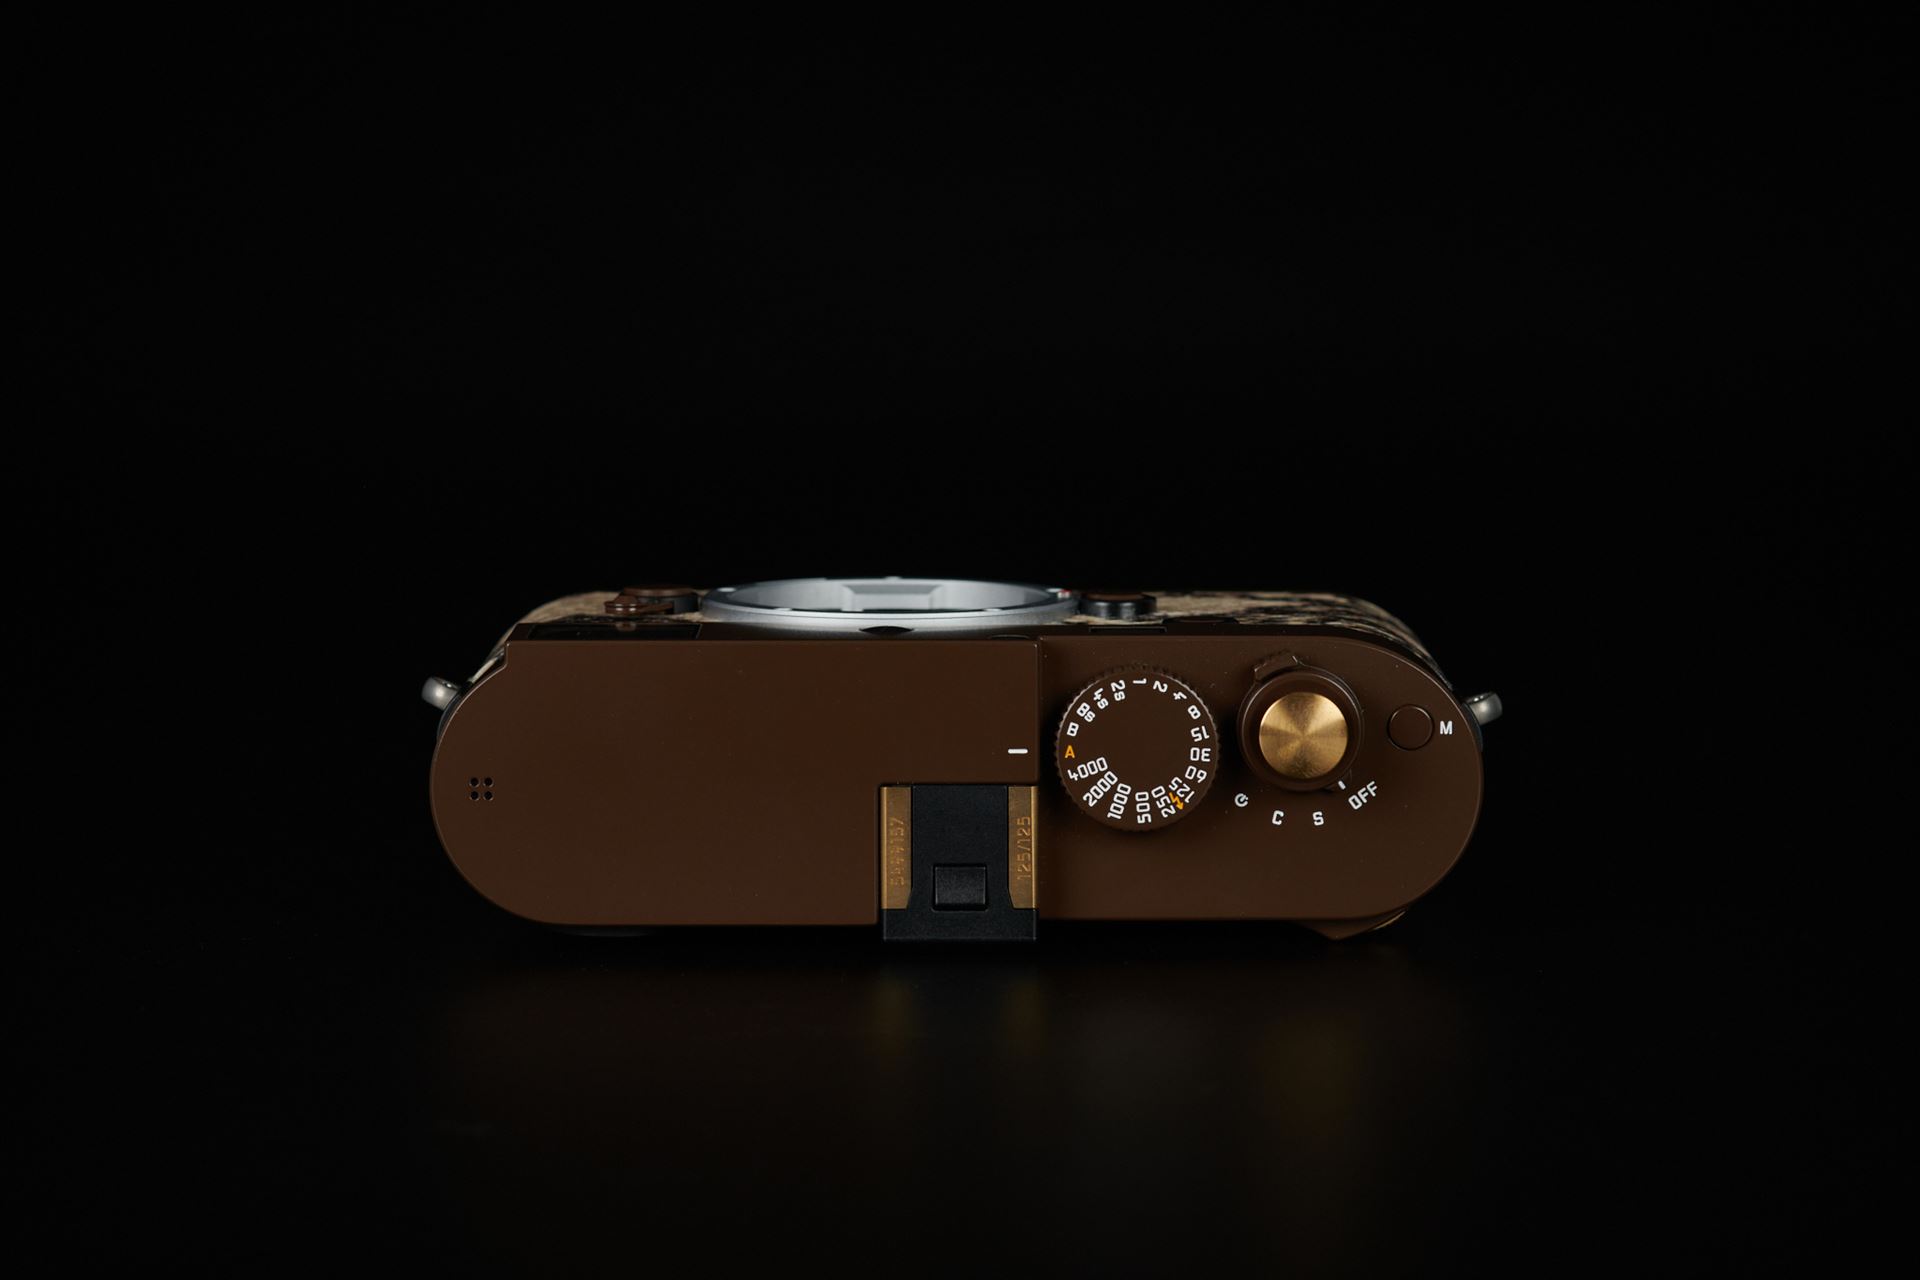 Picture of Leica M Monochrom "Drifter" set